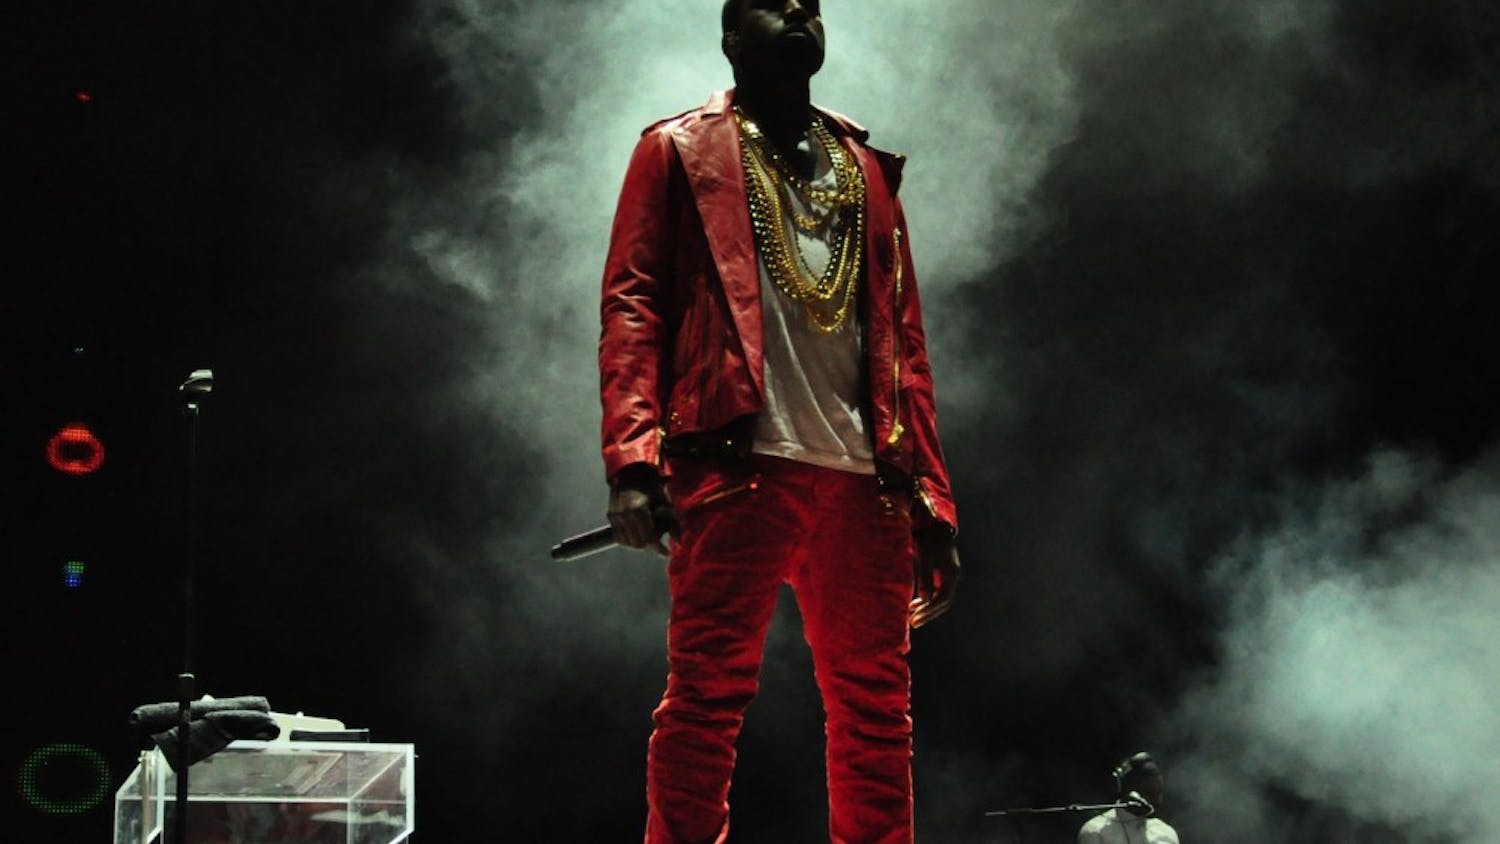 The WUD Society and Politics hosted discussion&nbsp;seemed only to hint at Kanye West’s impact in 2018, while most attendees were very comfortable defending his impact on the music industry as a whole.